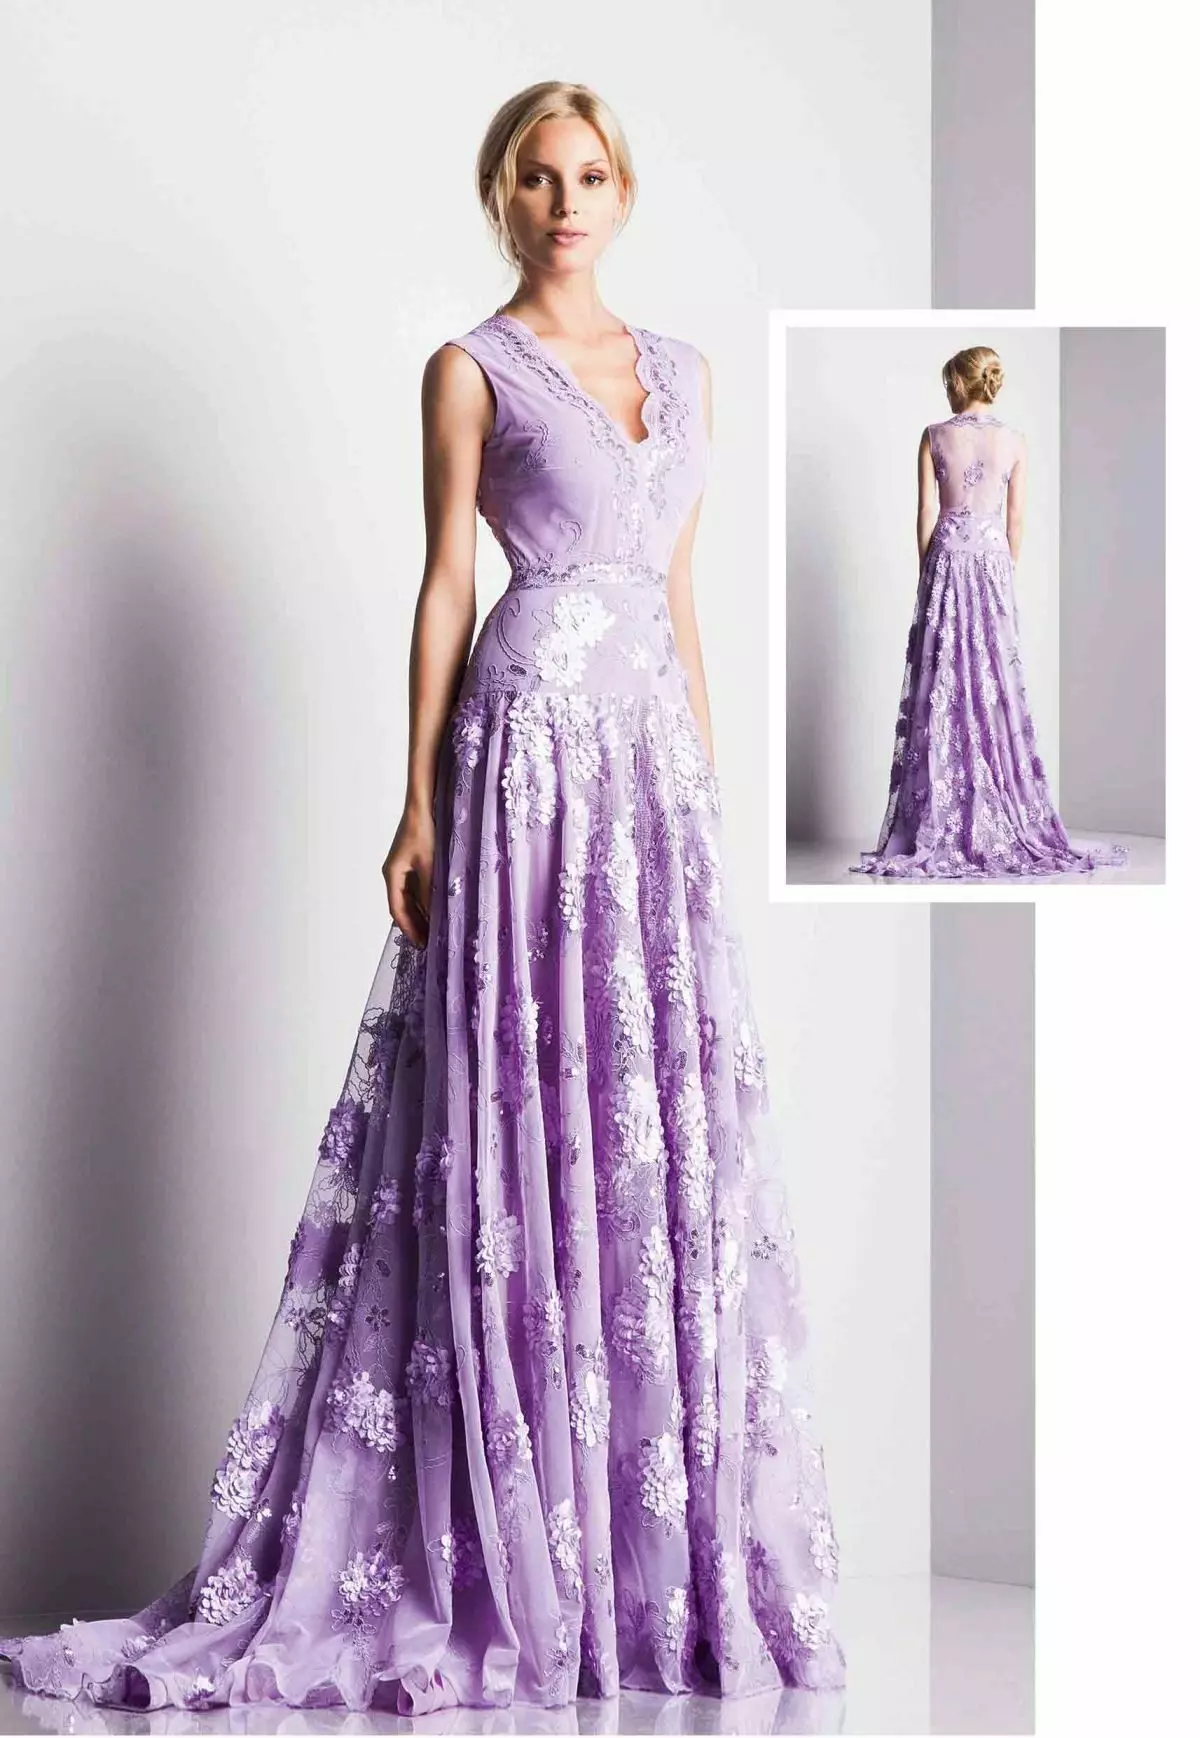 Lilac Dress for Blonde